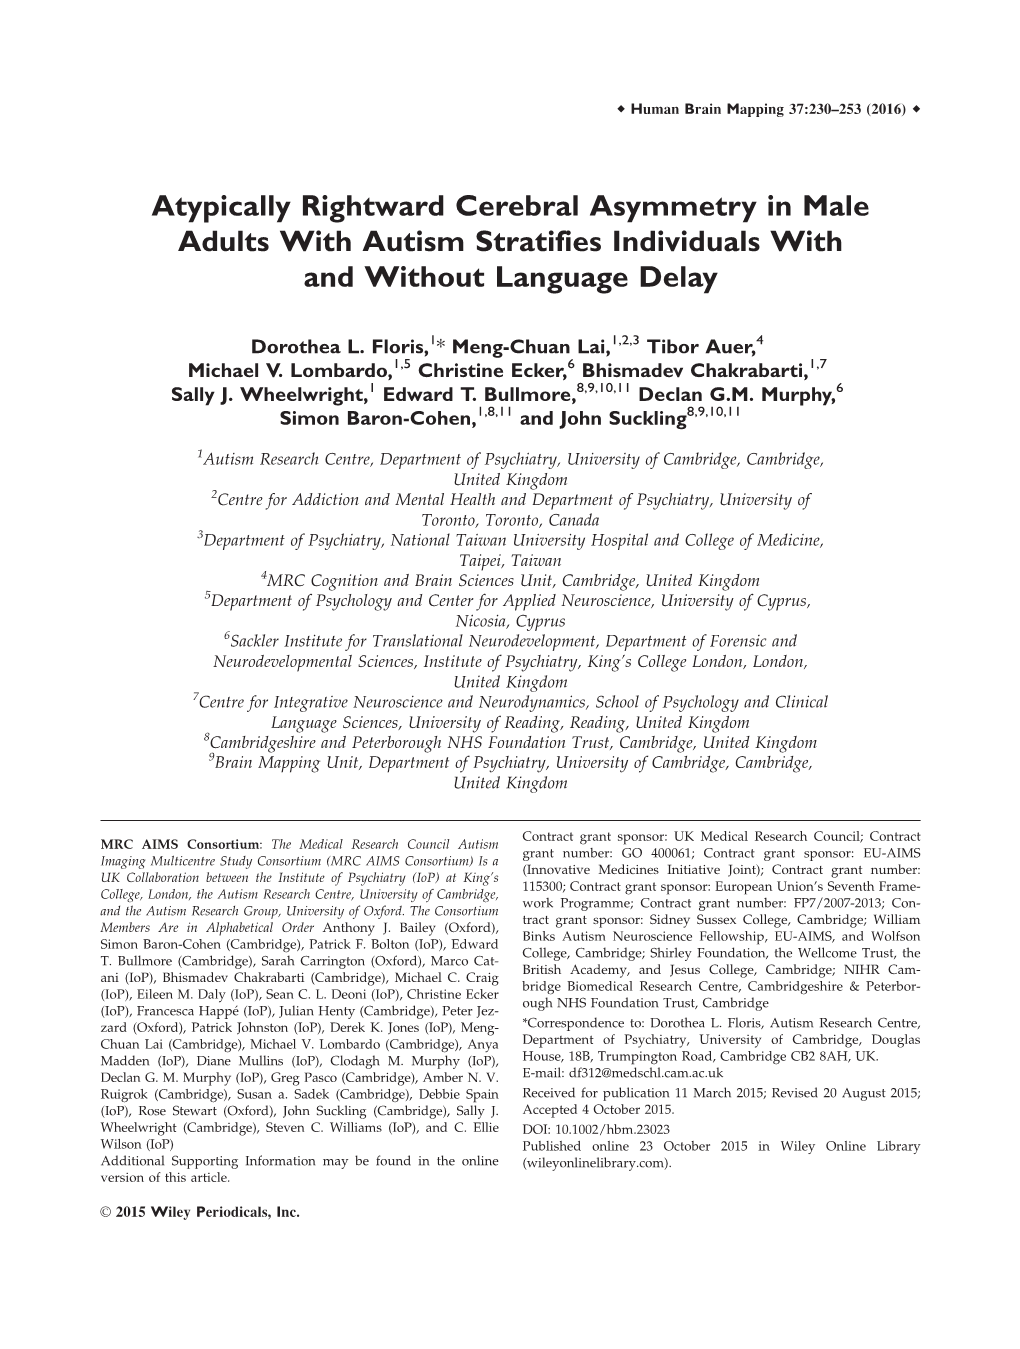 Atypically Rightward Cerebral Asymmetry in Male Adults with Autism Stratifies Individuals with and Without Language Delay